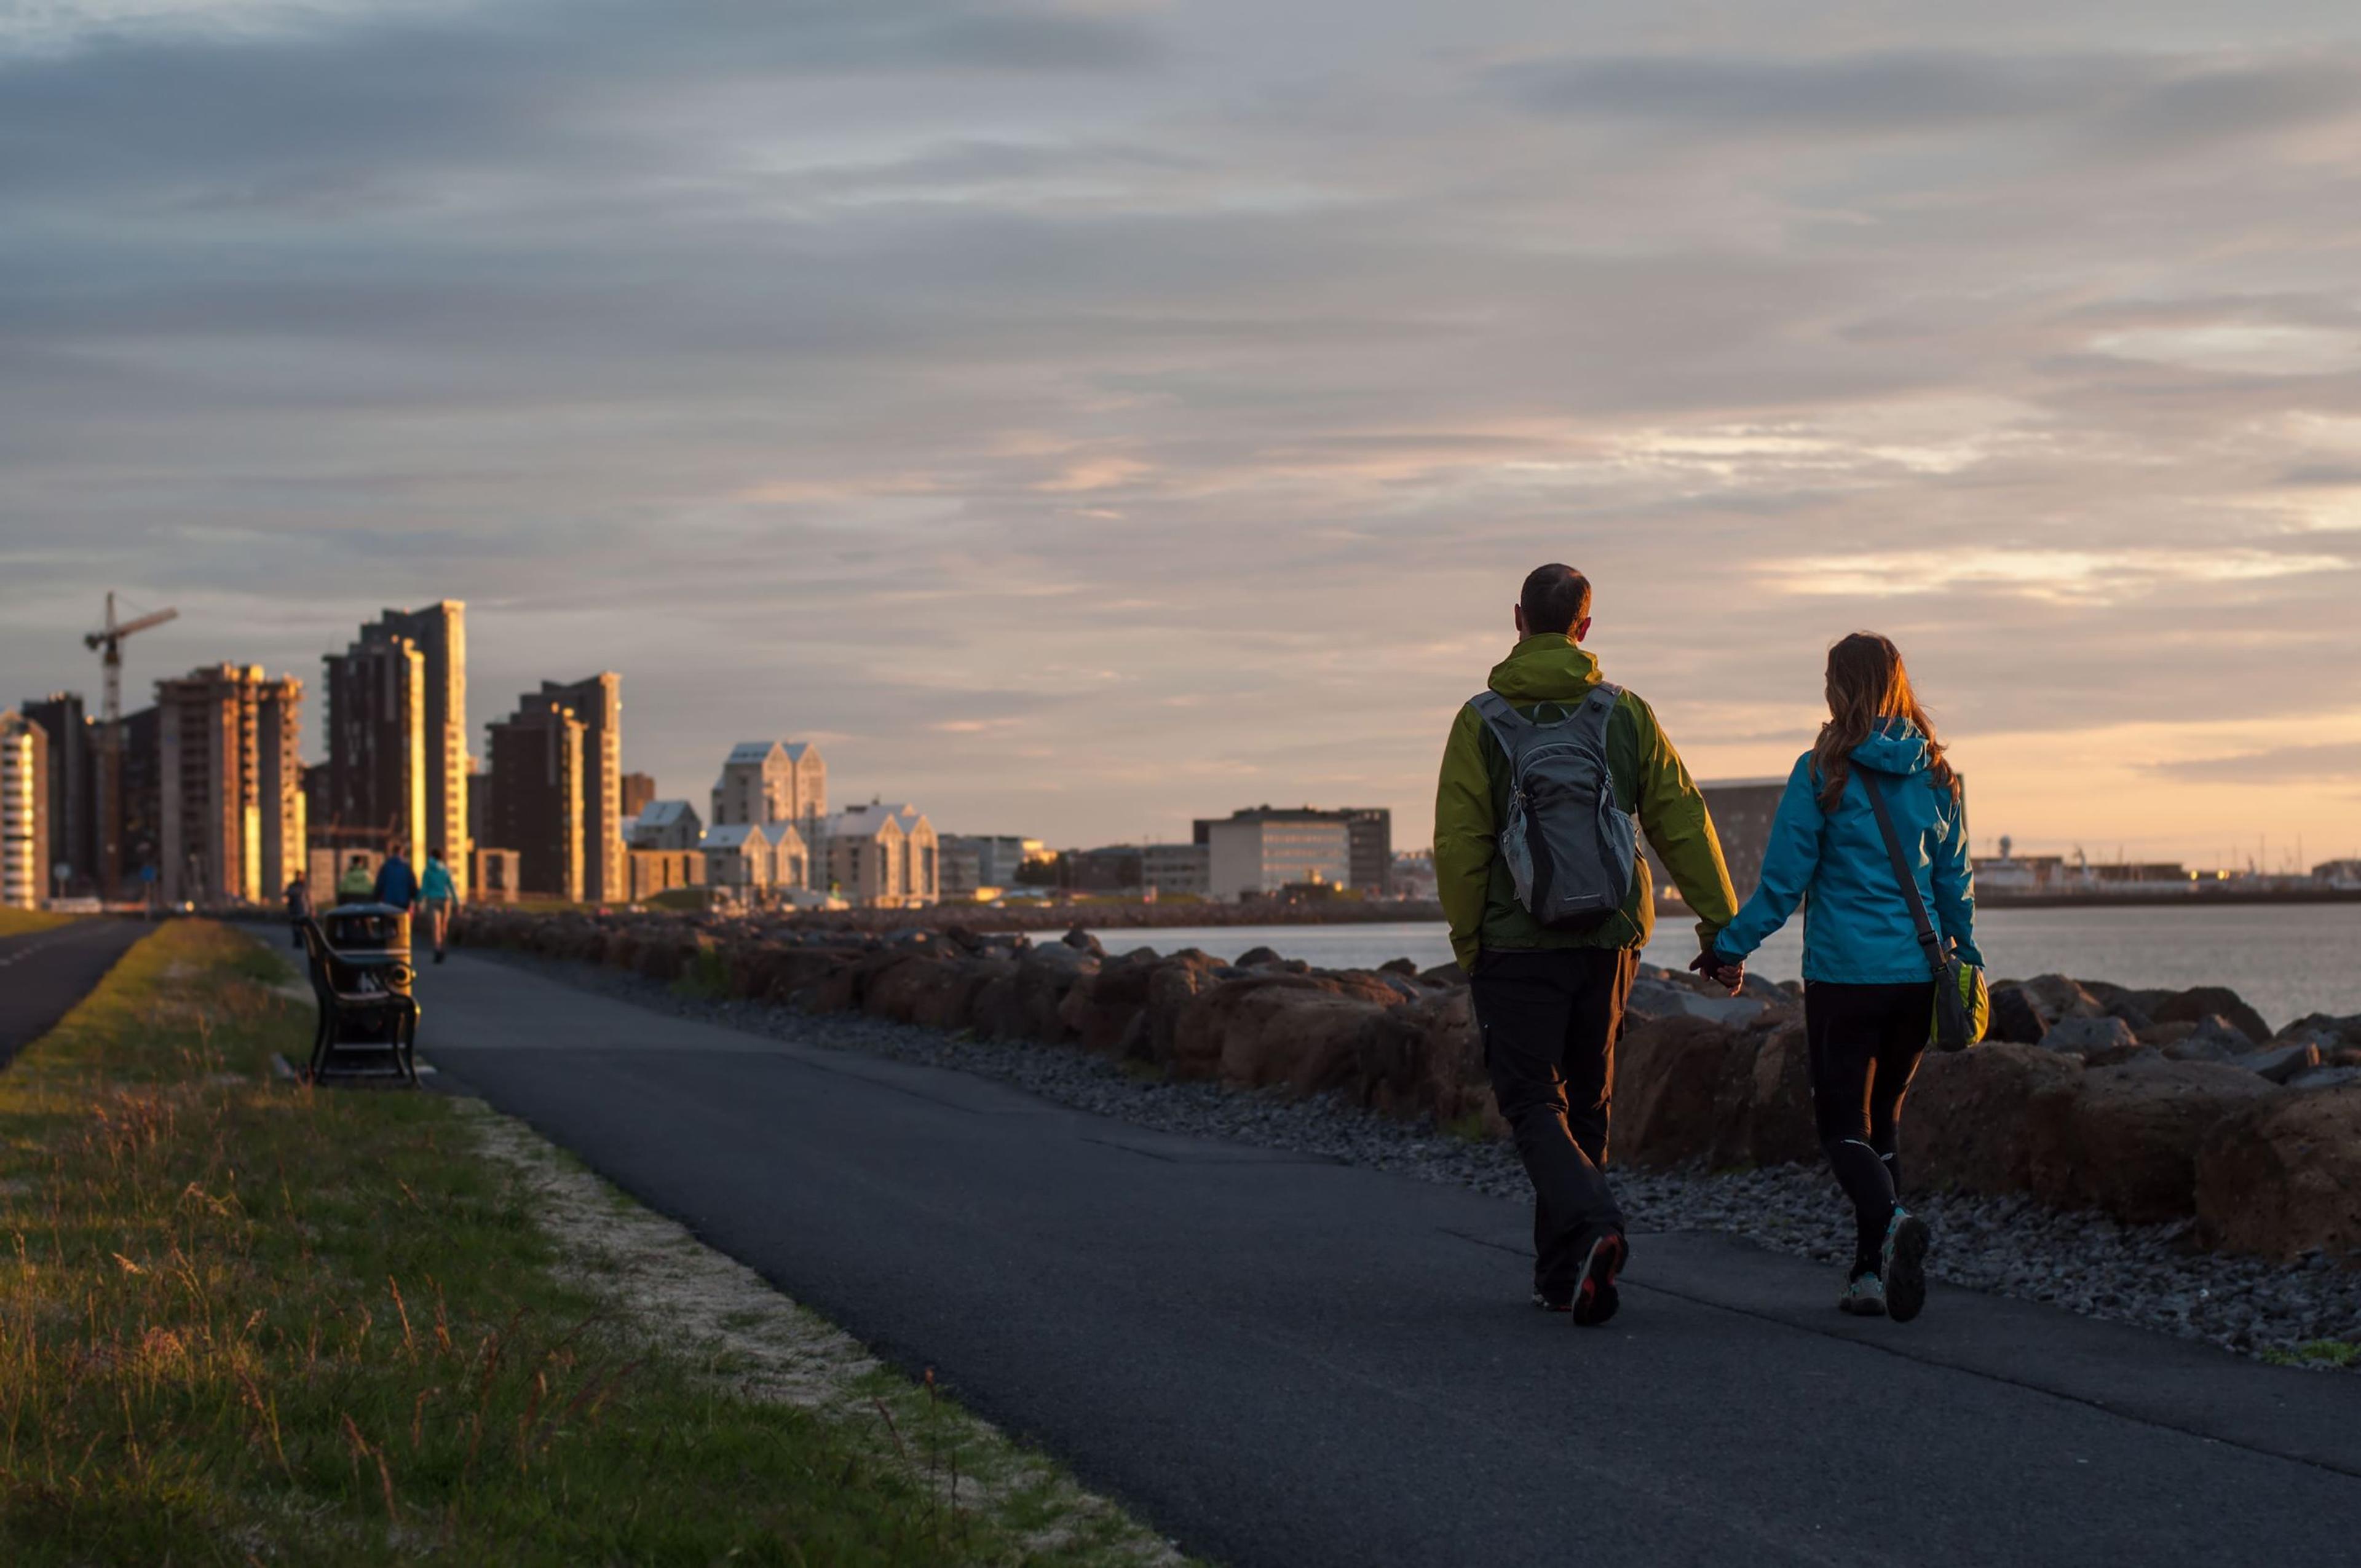 A couple strolling along the coast of Reykjavík at sunset, with the city's tallest skyscrapers silhouetted in the background